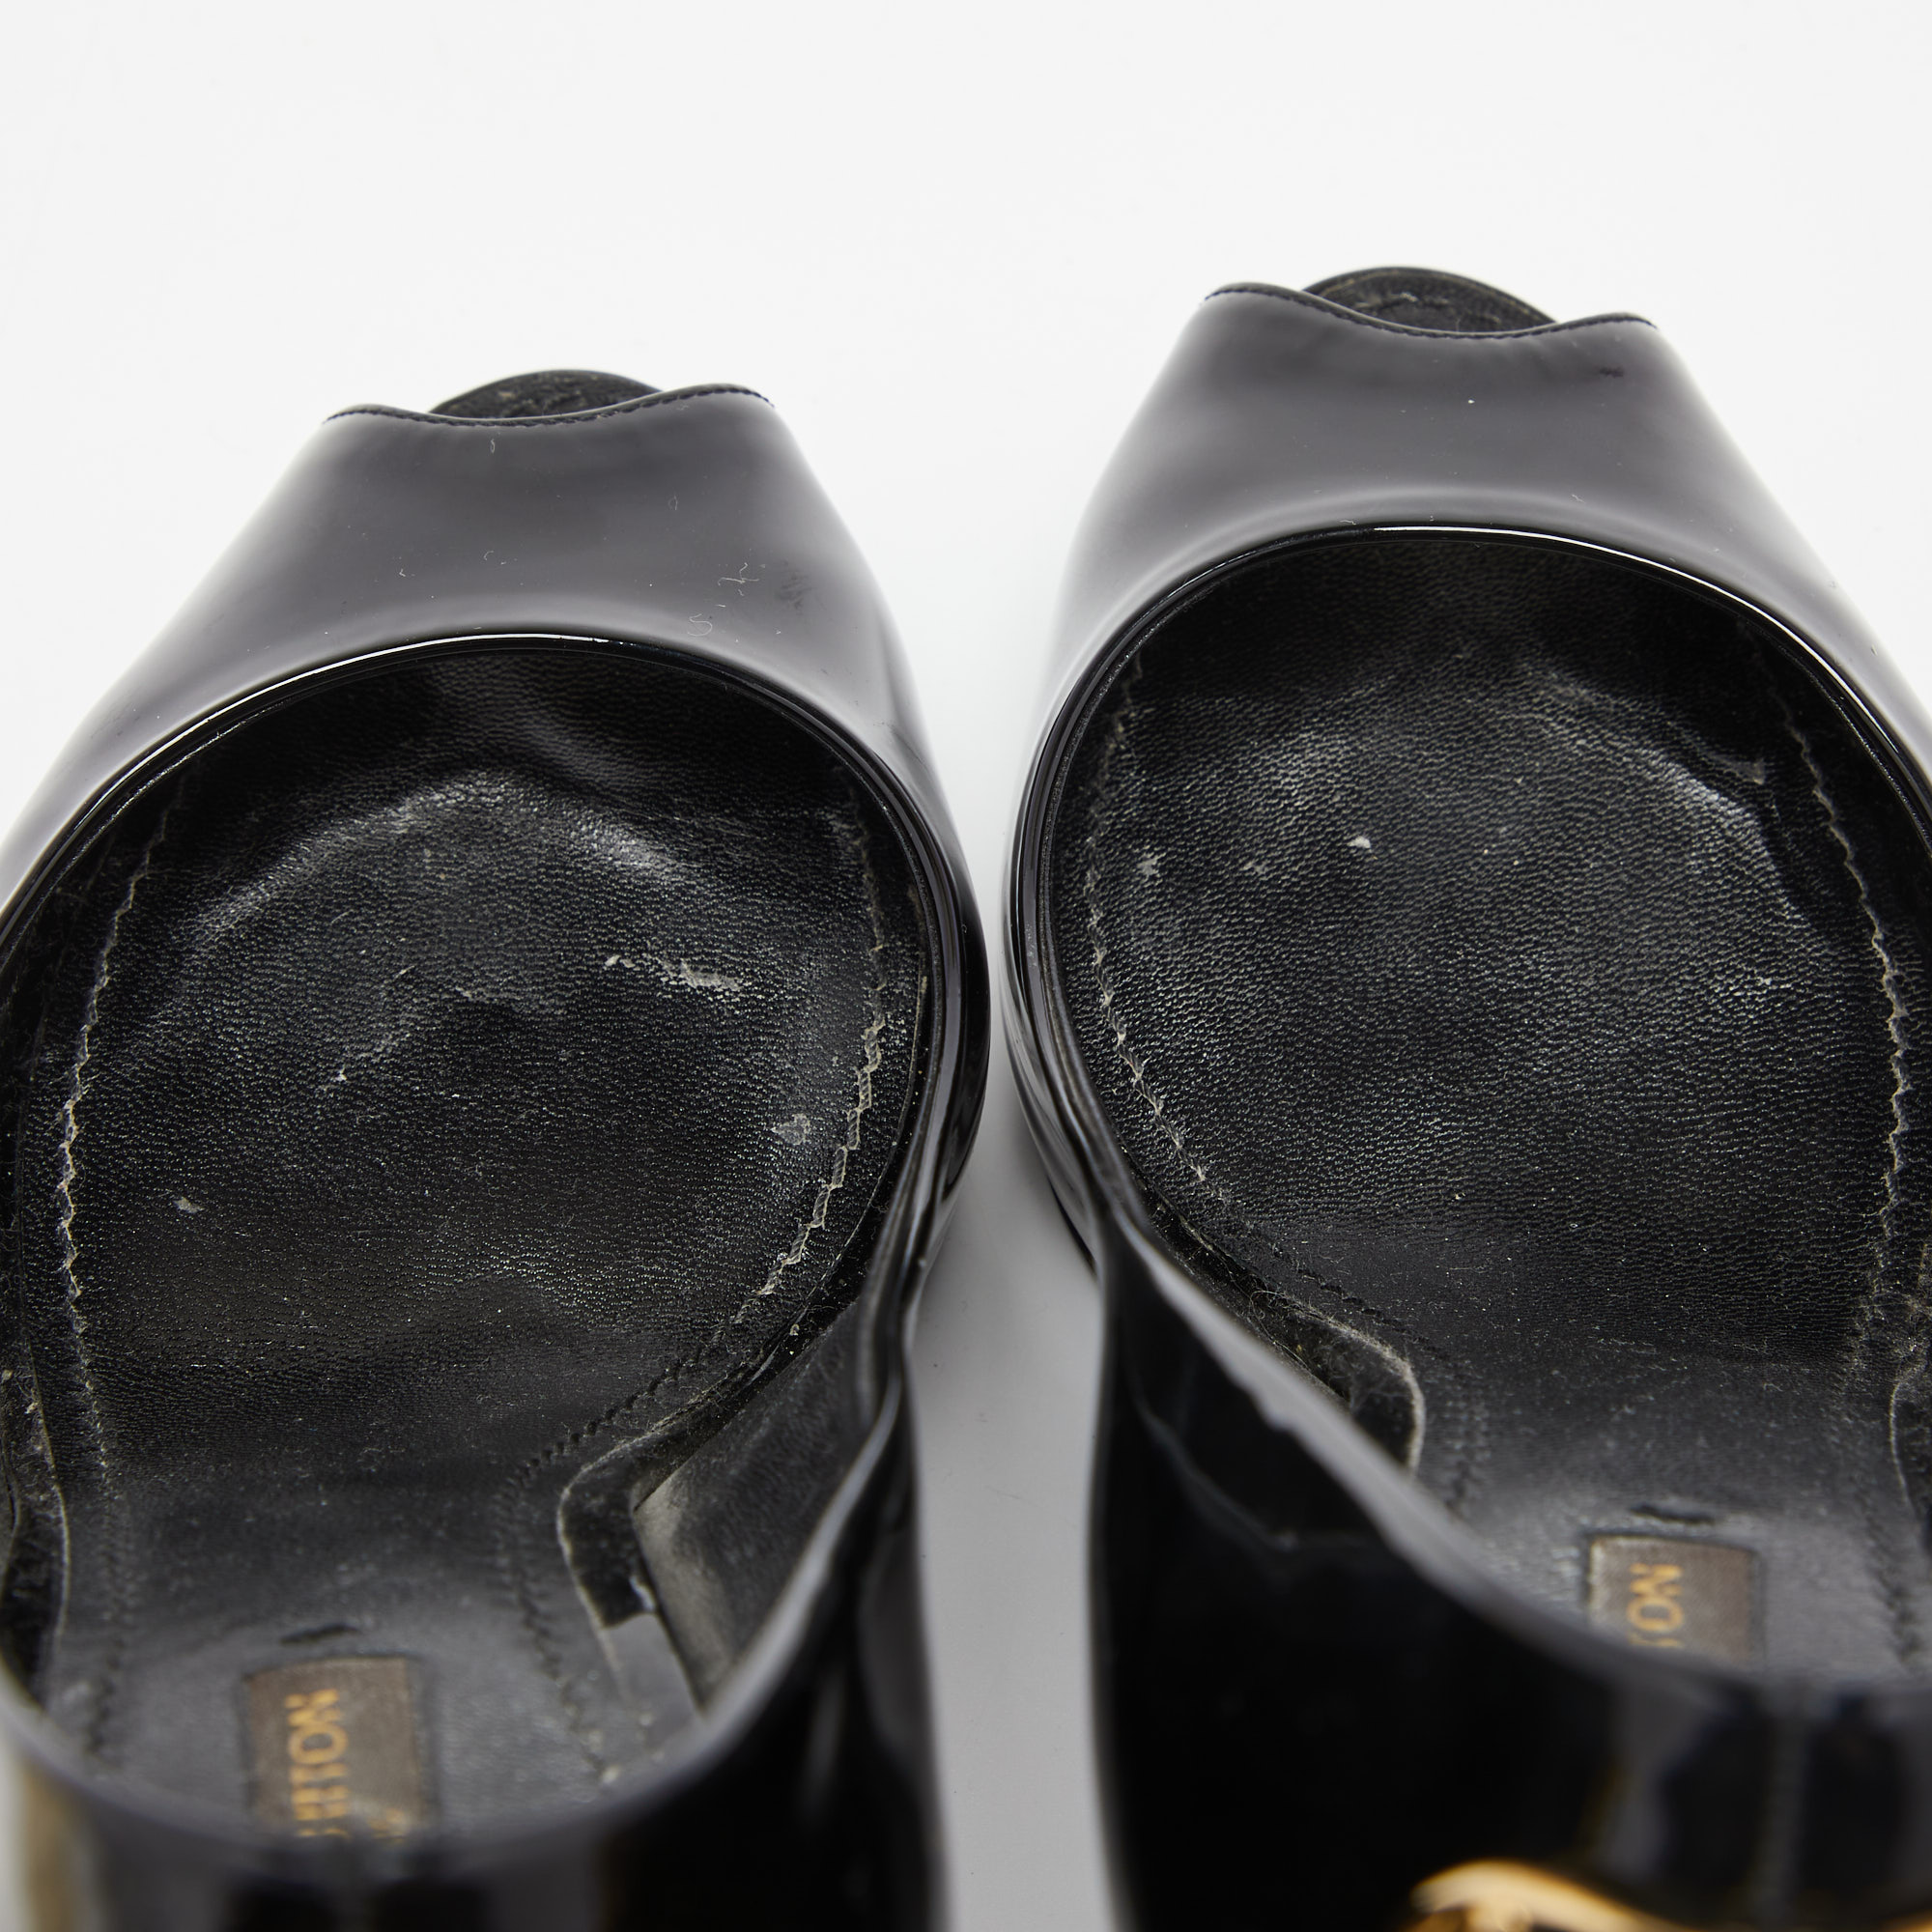 Louis Vuitton Black Patent Leather Oh Really! Peep Toe Pumps Size 36.5